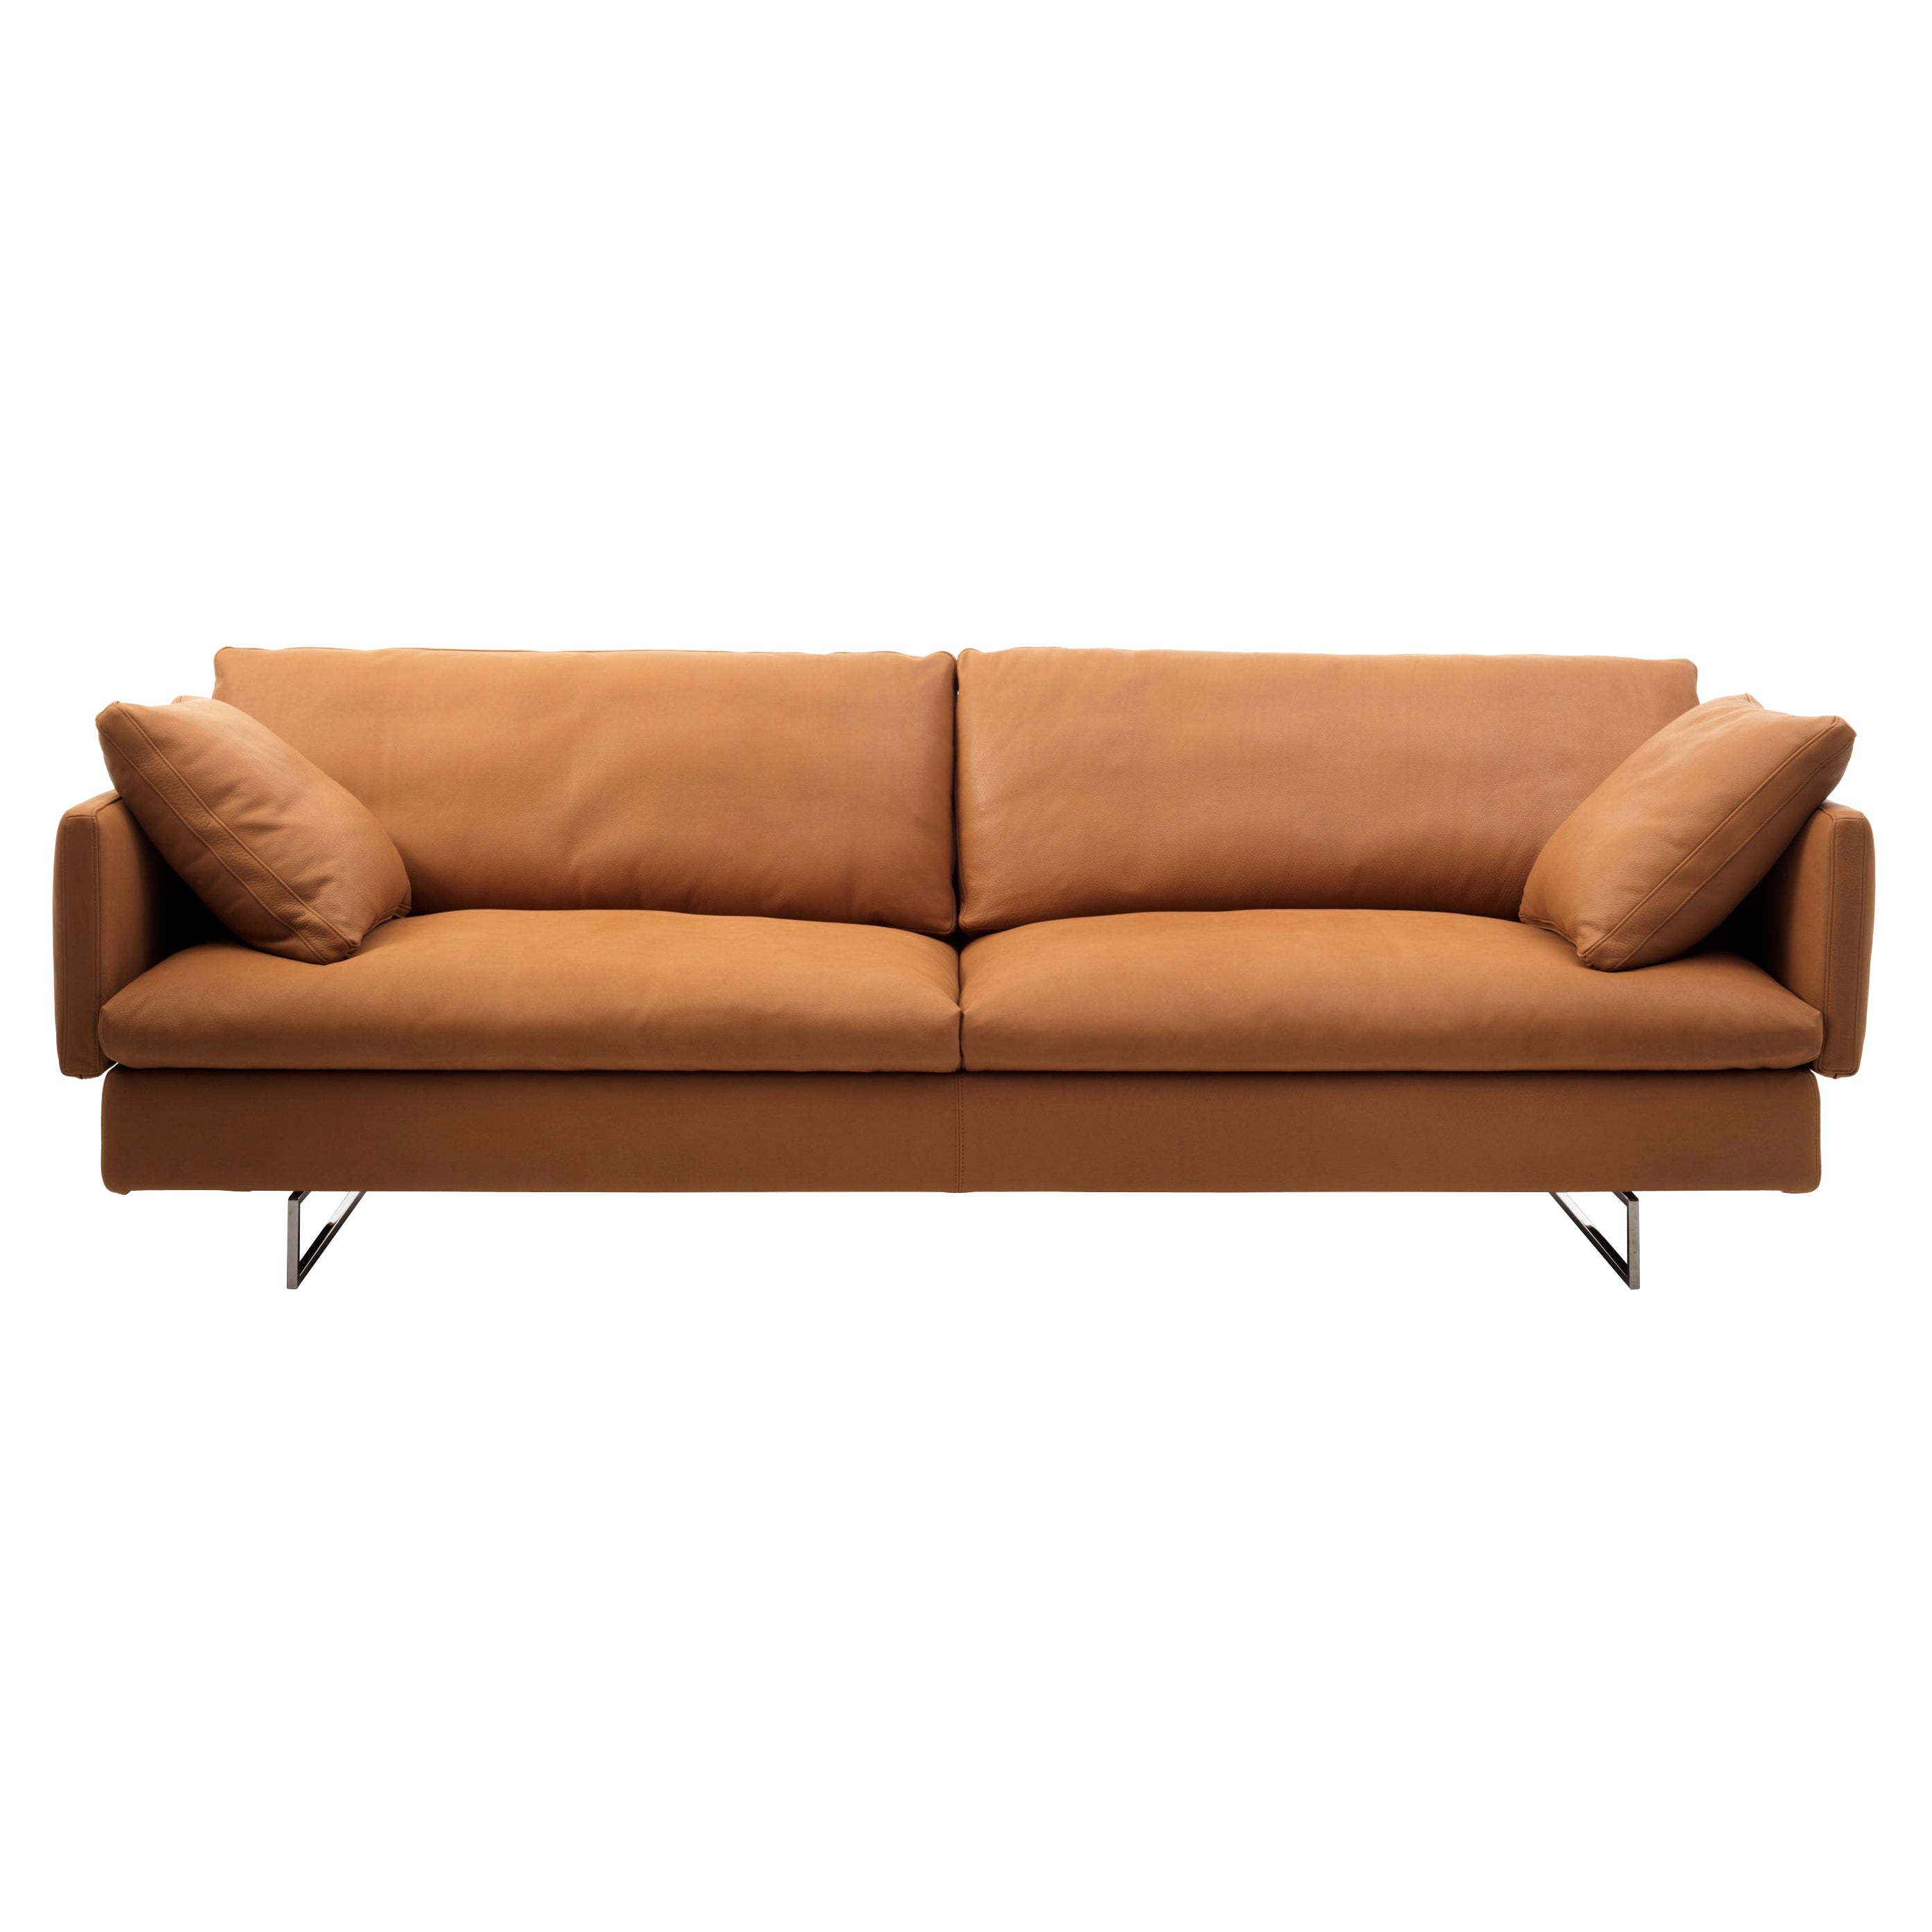 Voyage Medium Sofa in Natural Leather Upholstery & Black Nickel by Sergio Bicego